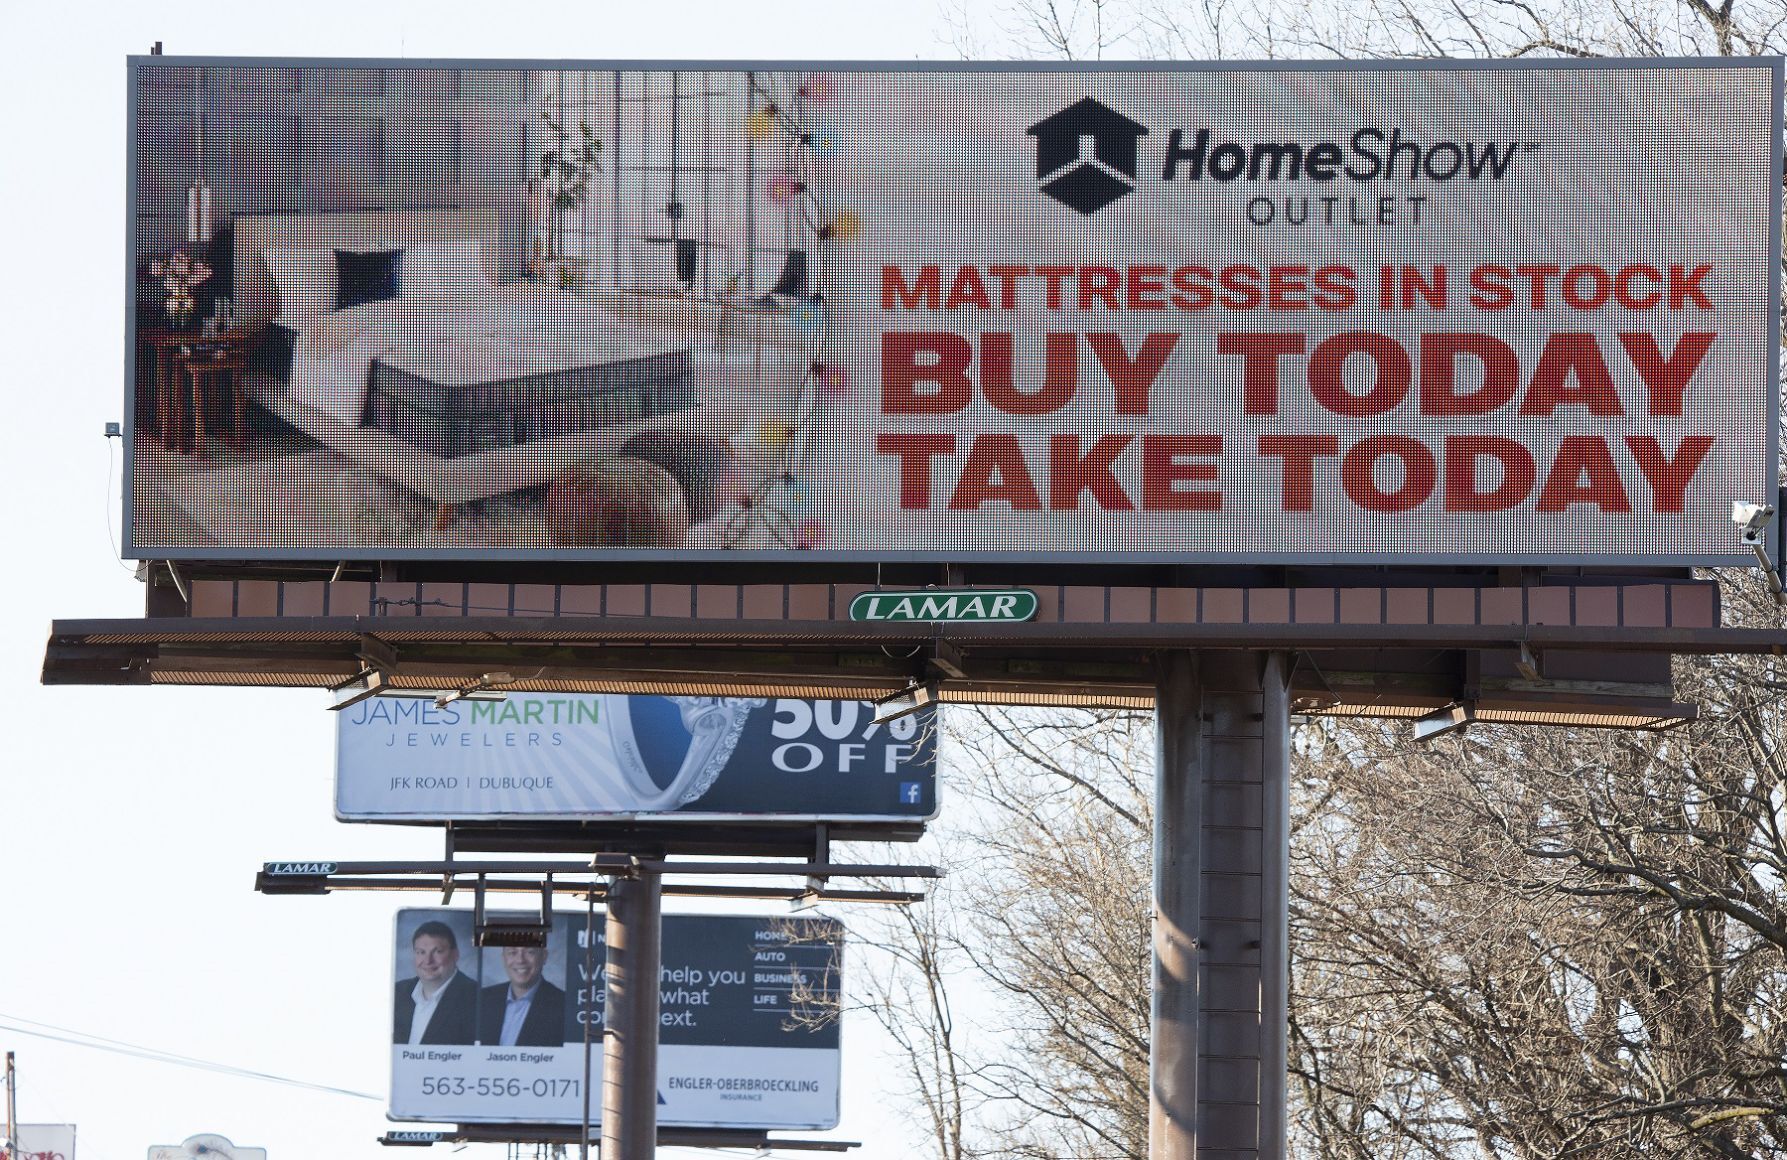 Billboards along Dodge Street in Dubuque.    PHOTO CREDIT: Dave Kettering
Telegraph Herald